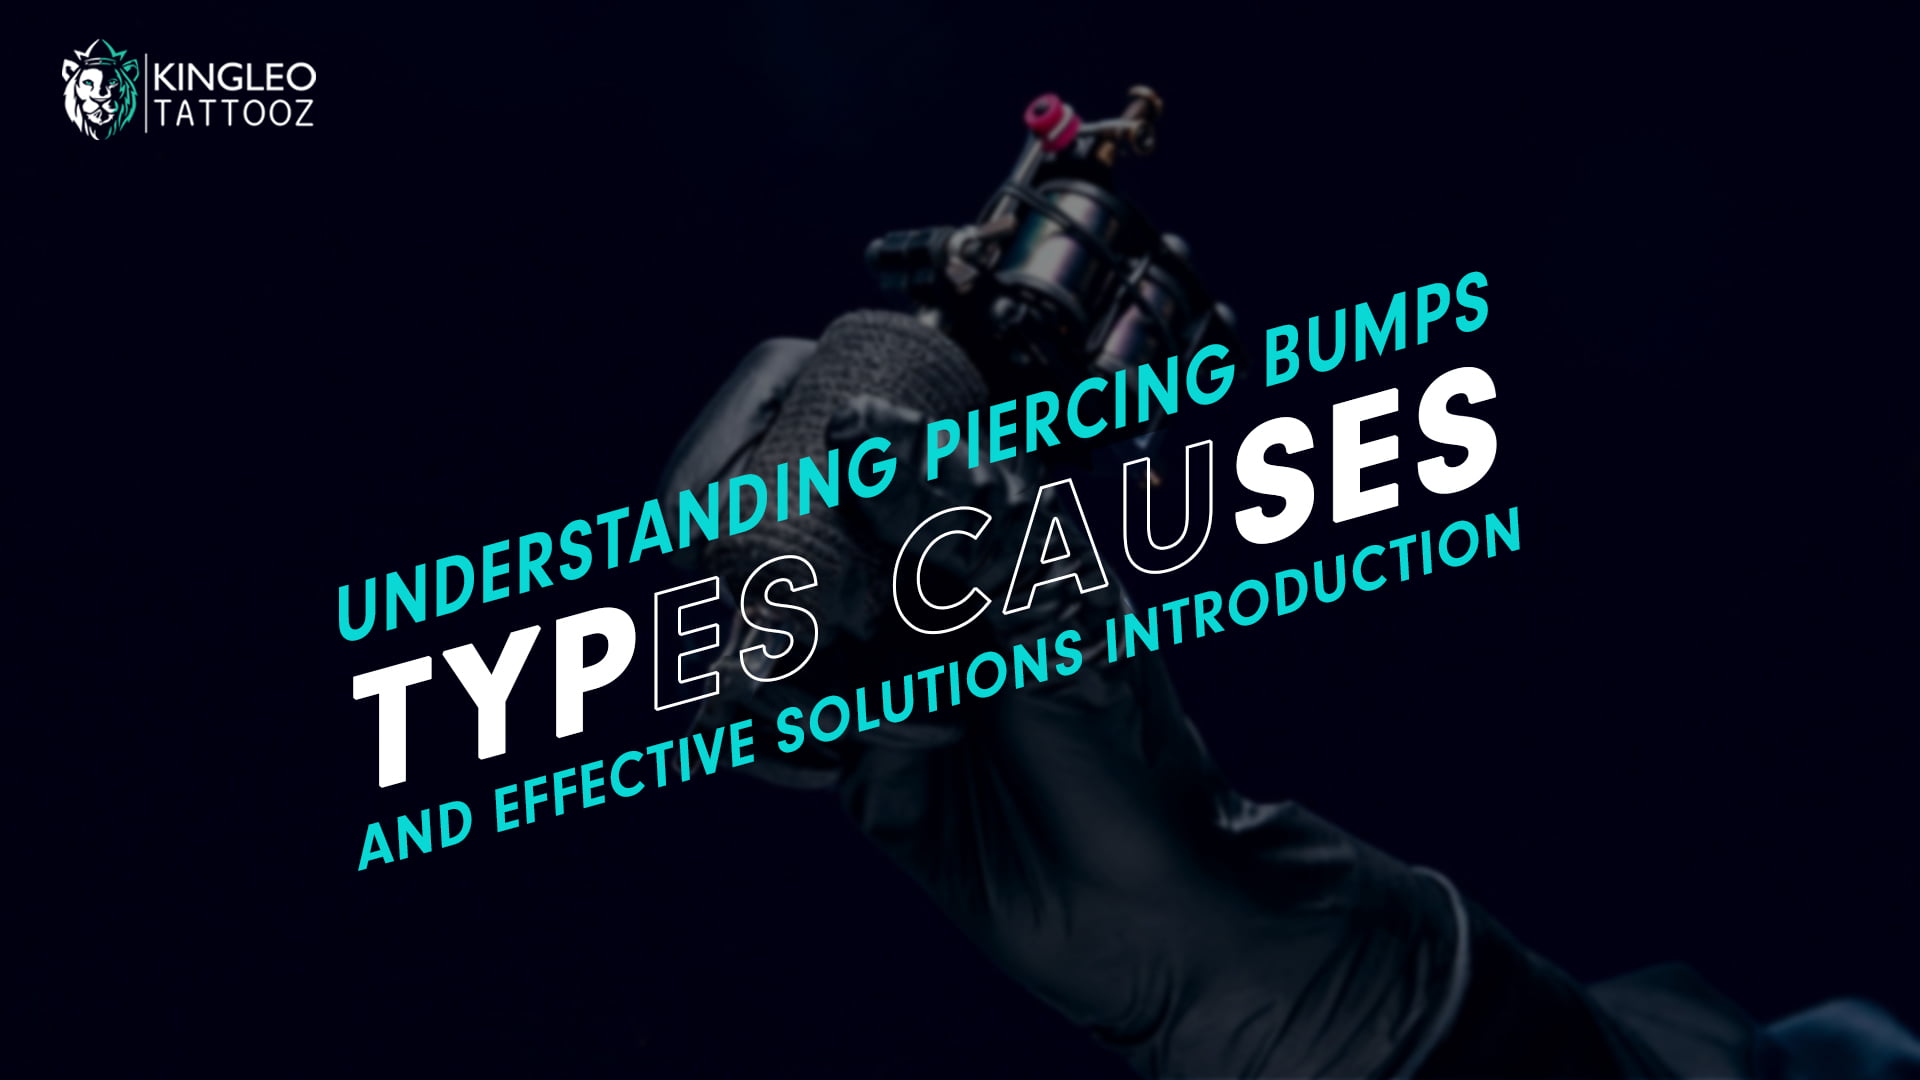 A Comprehensive Guide To Different Types Of Piercing Bumps And Effective Remedies